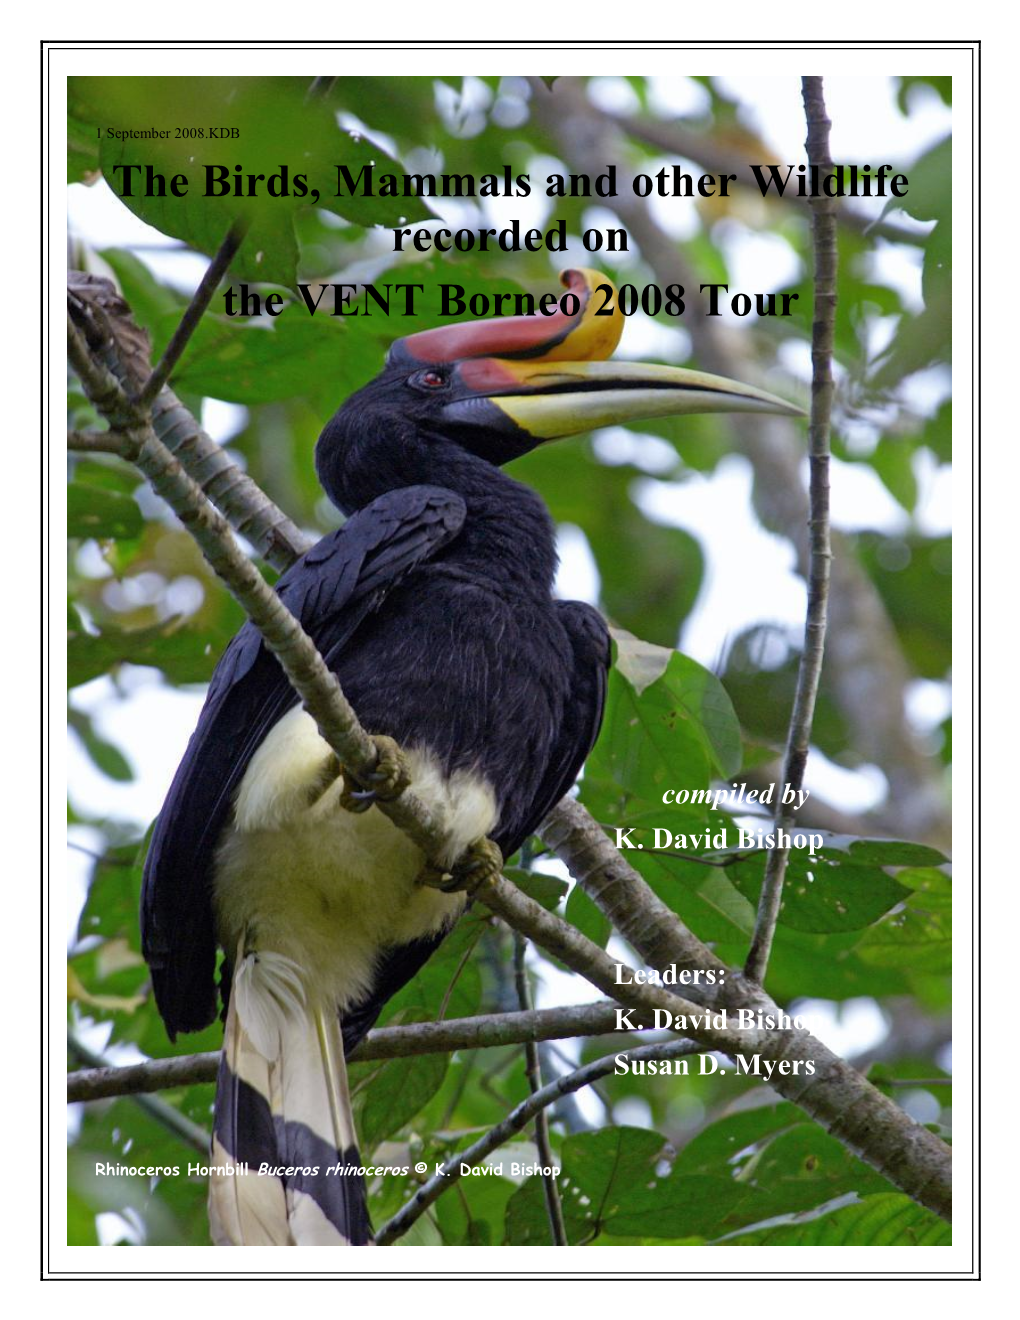 The Birds, Mammals and Other Wildlife Recorded on the VENT Borneo 2008 Tour